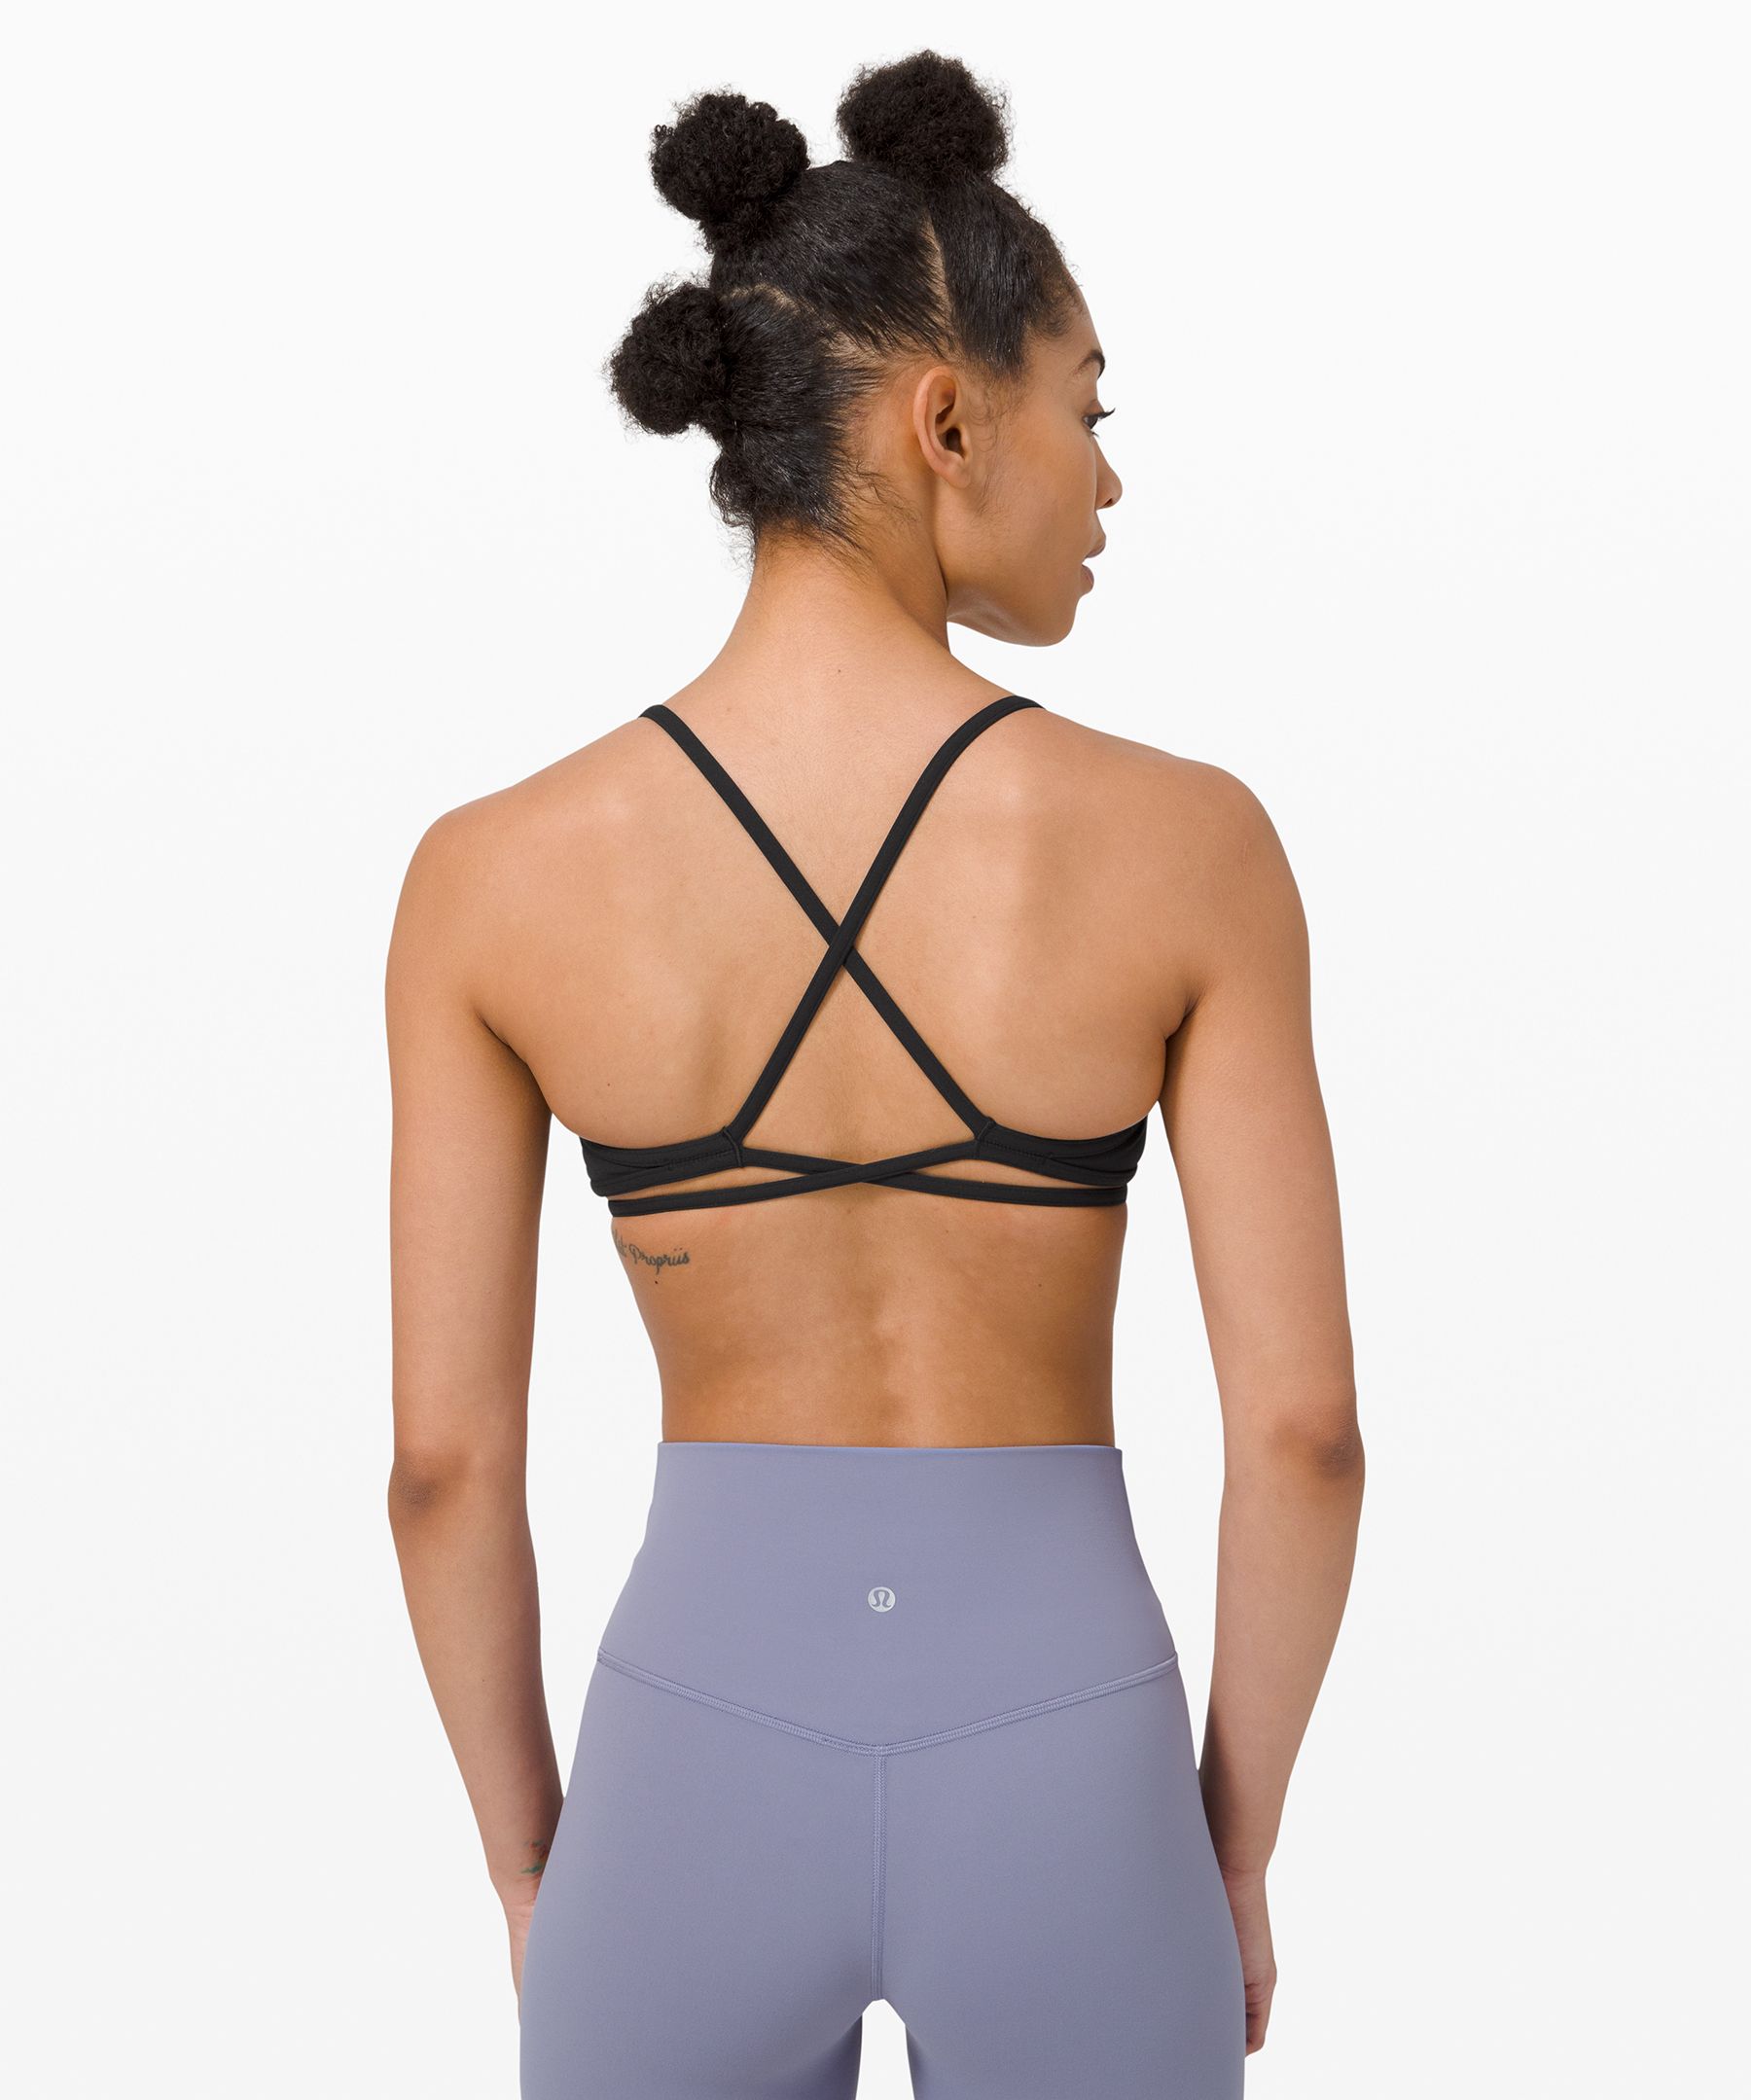 Quiet Within Bra*Light Support, A/B Cup